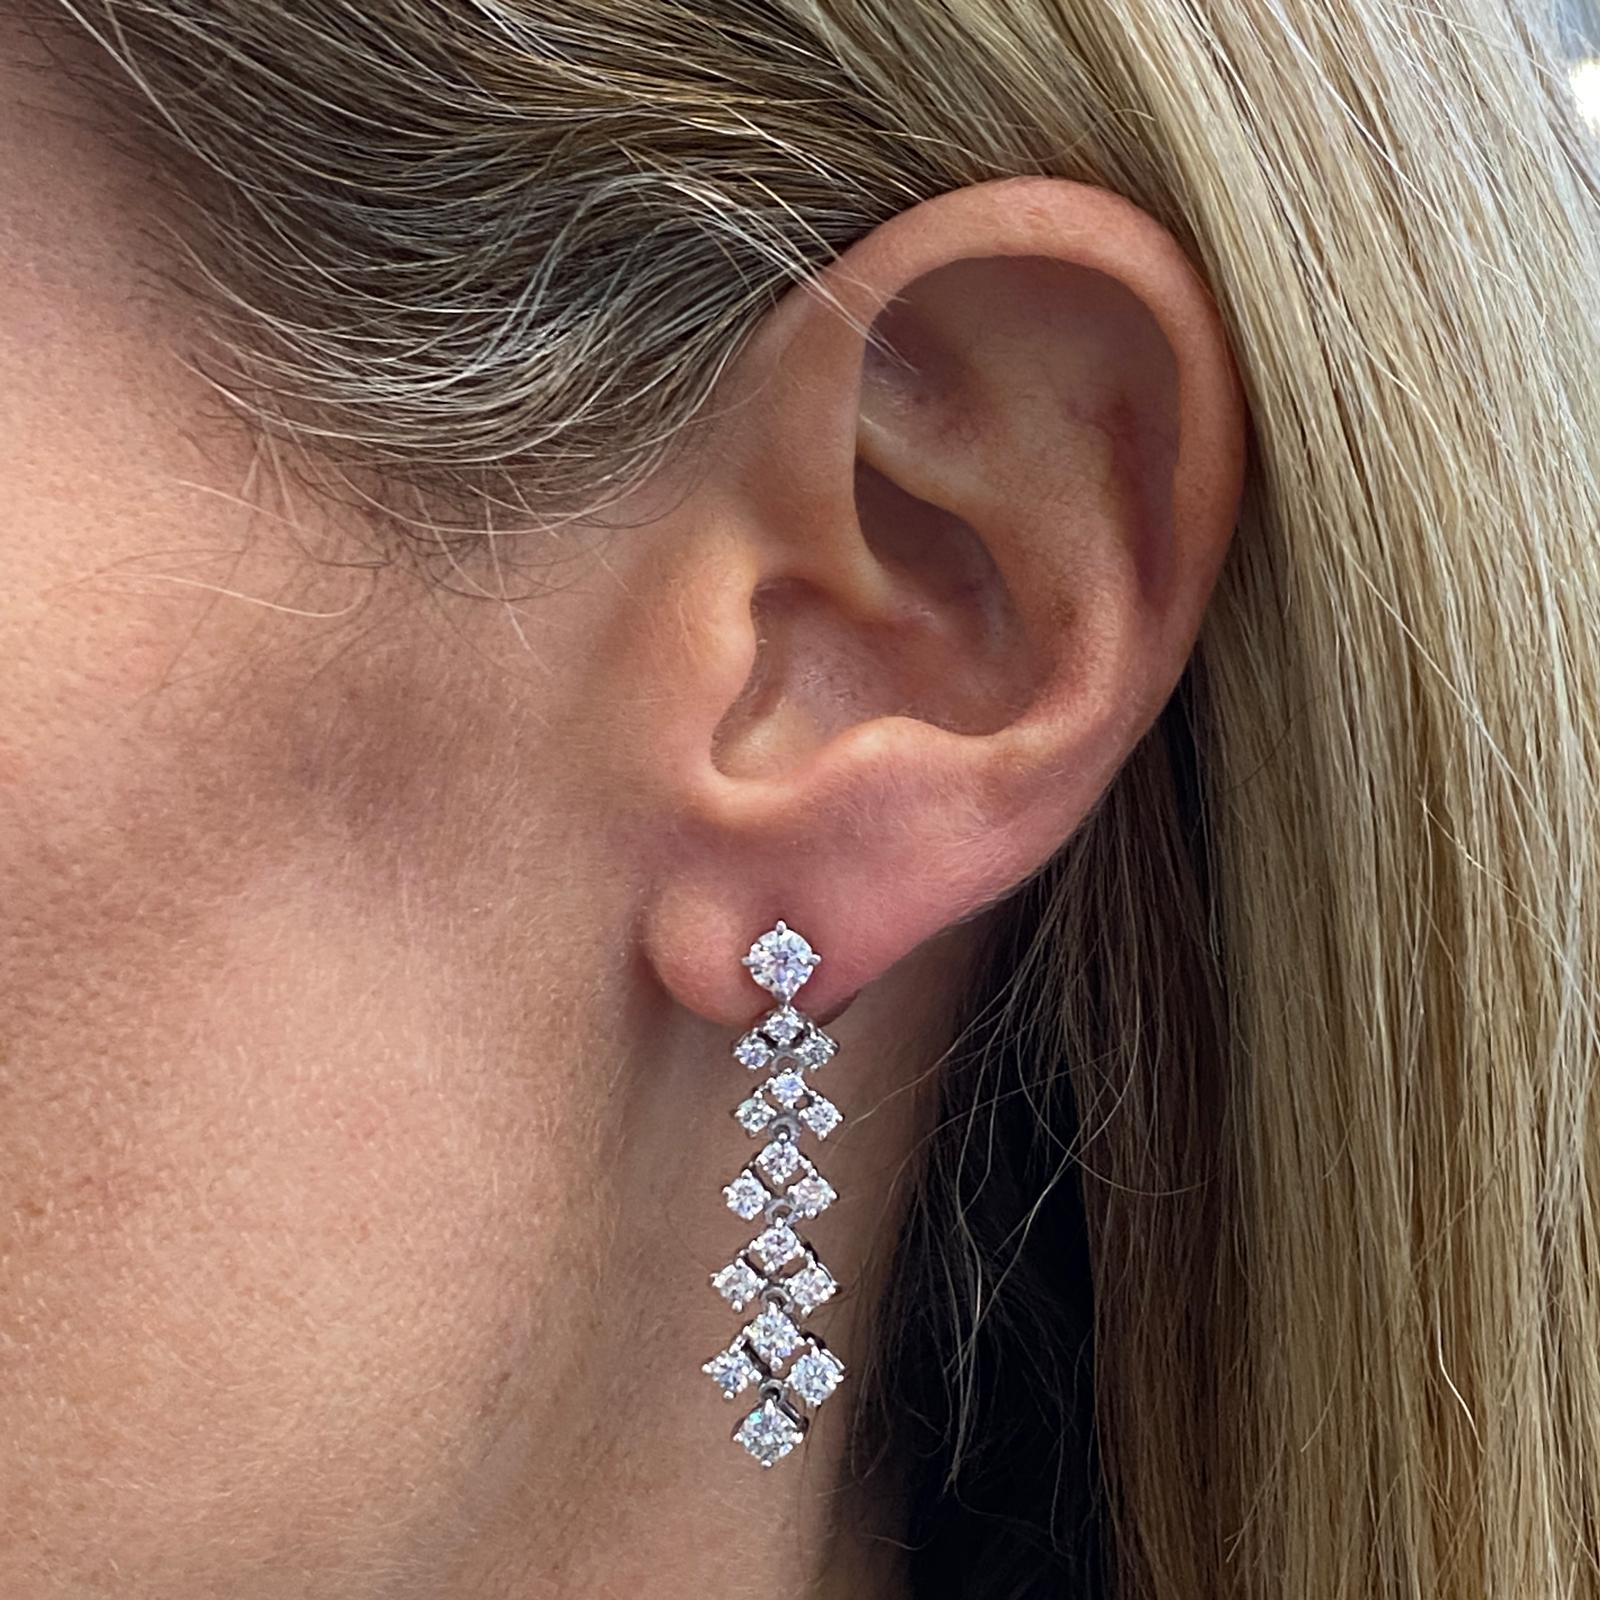 Beautiful diamond drop earrings fashioned in 14 karat white gold. The earrings feature 36 round brilliant cut diamonds weighing 3.90 carat total weight and graded G-H color and SI clarity. The mobile dangle drops measure 1.5 inches in length. 